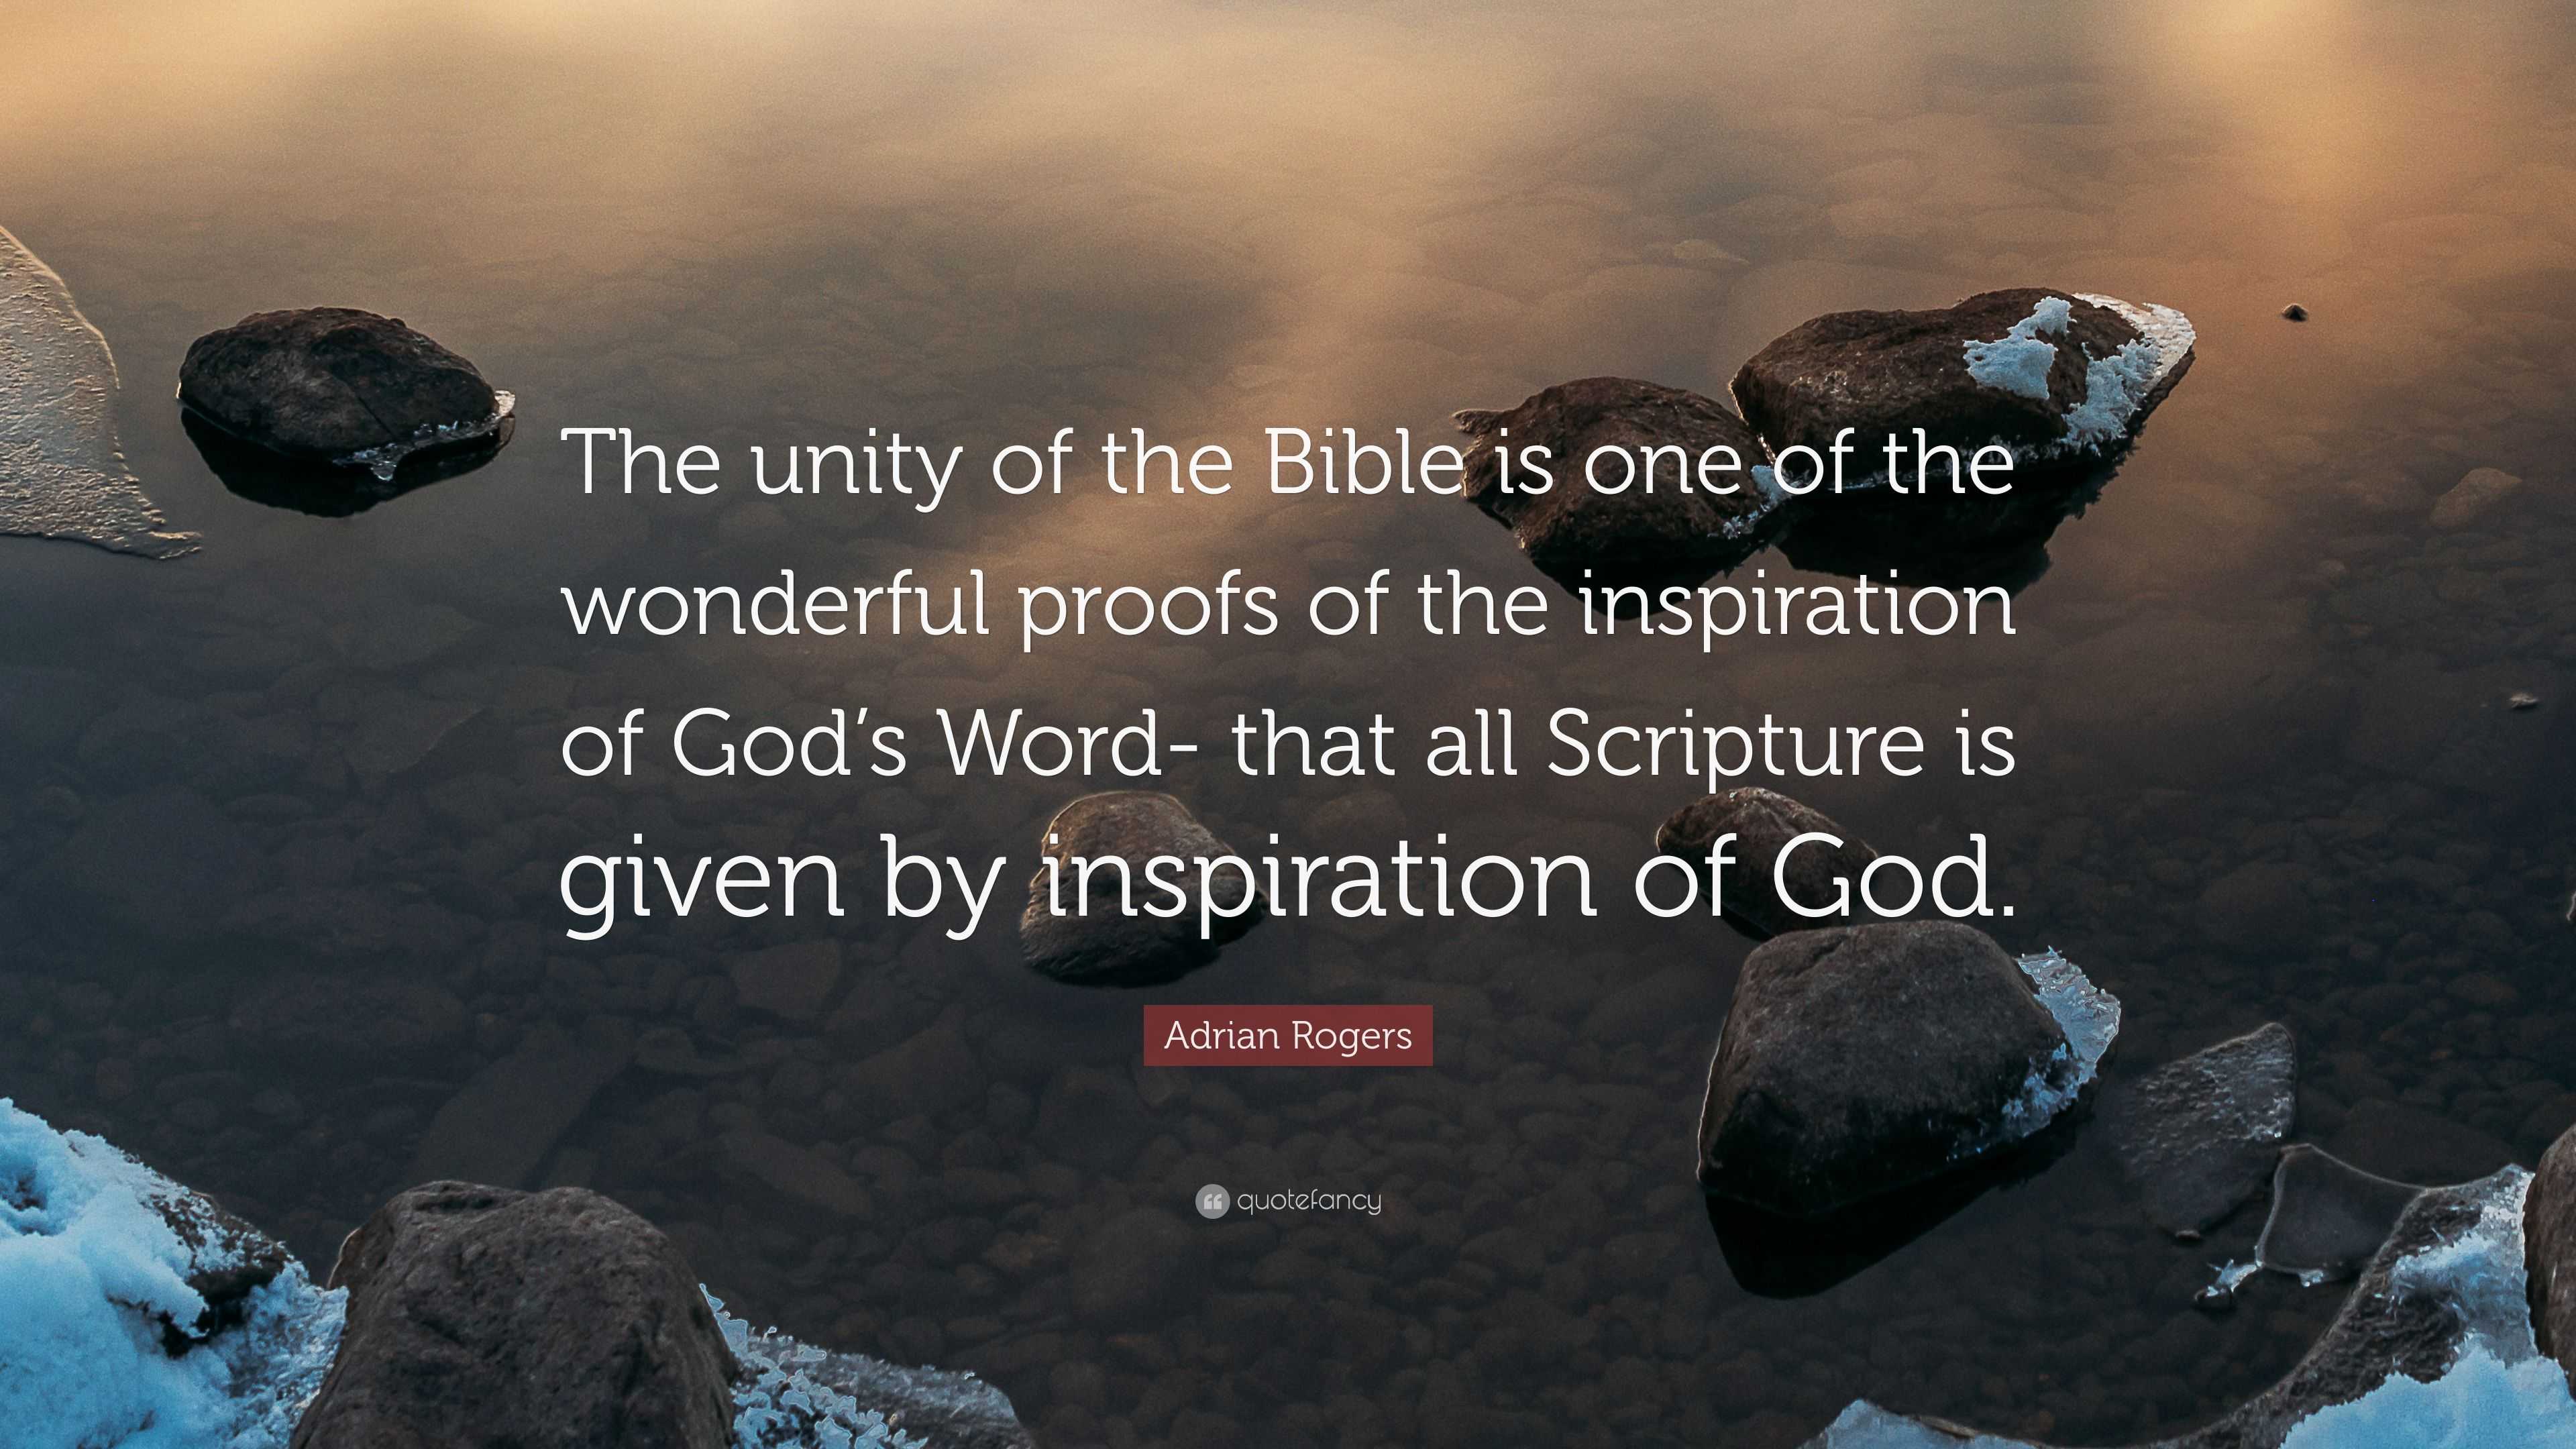 5520376 Adrian Rogers Quote The unity of the Bible is one of the wonderful